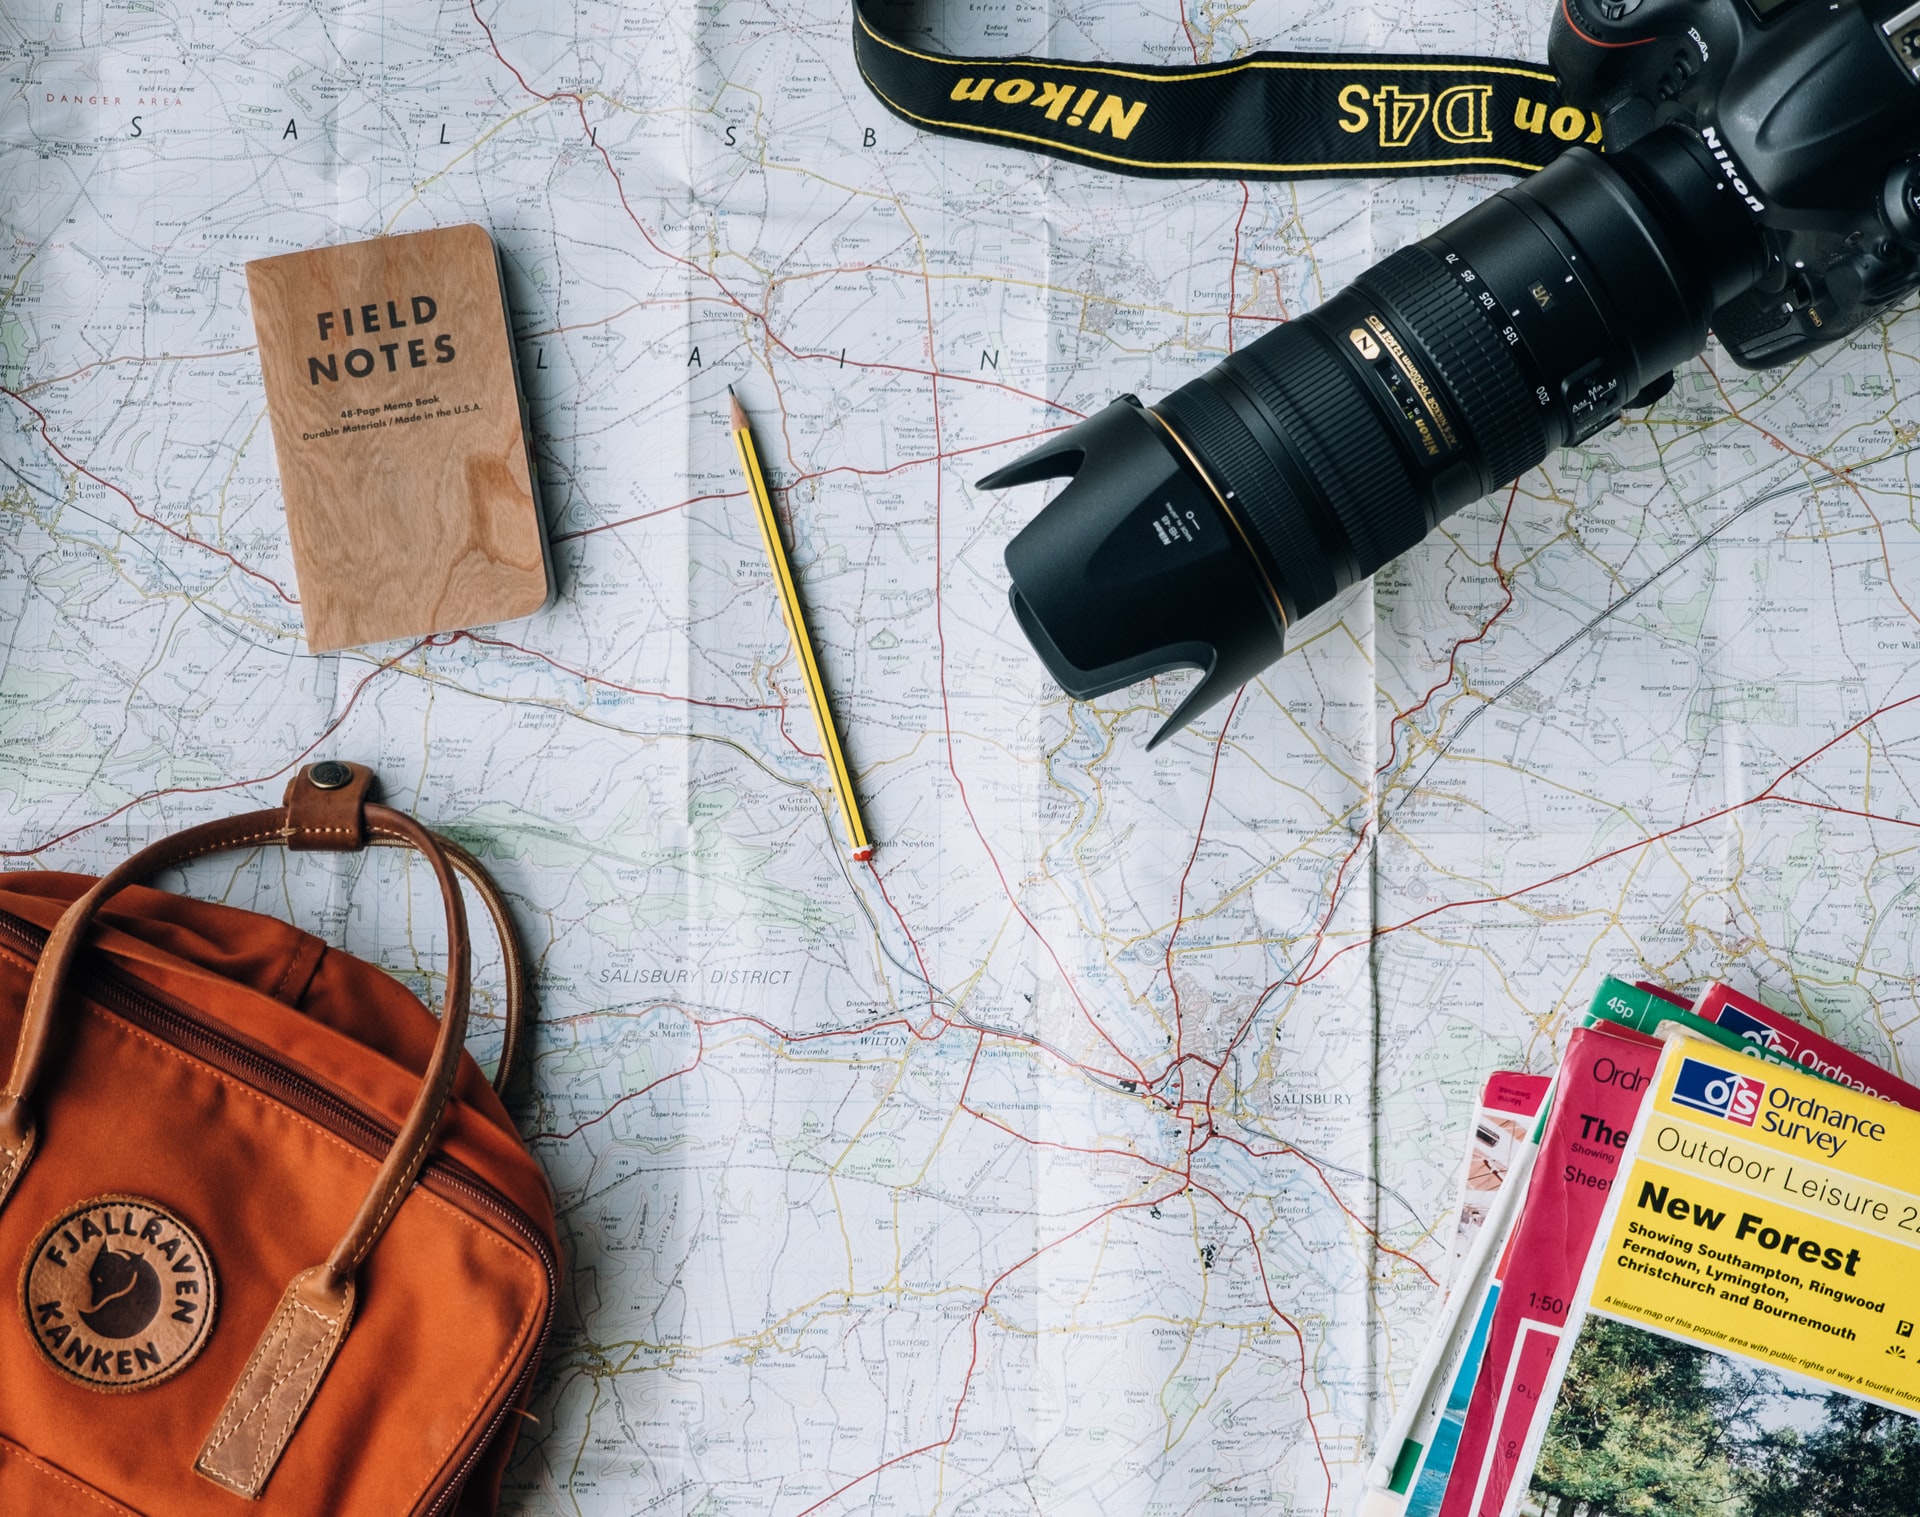 Camera, books, backpack, and a pencil laying on a map